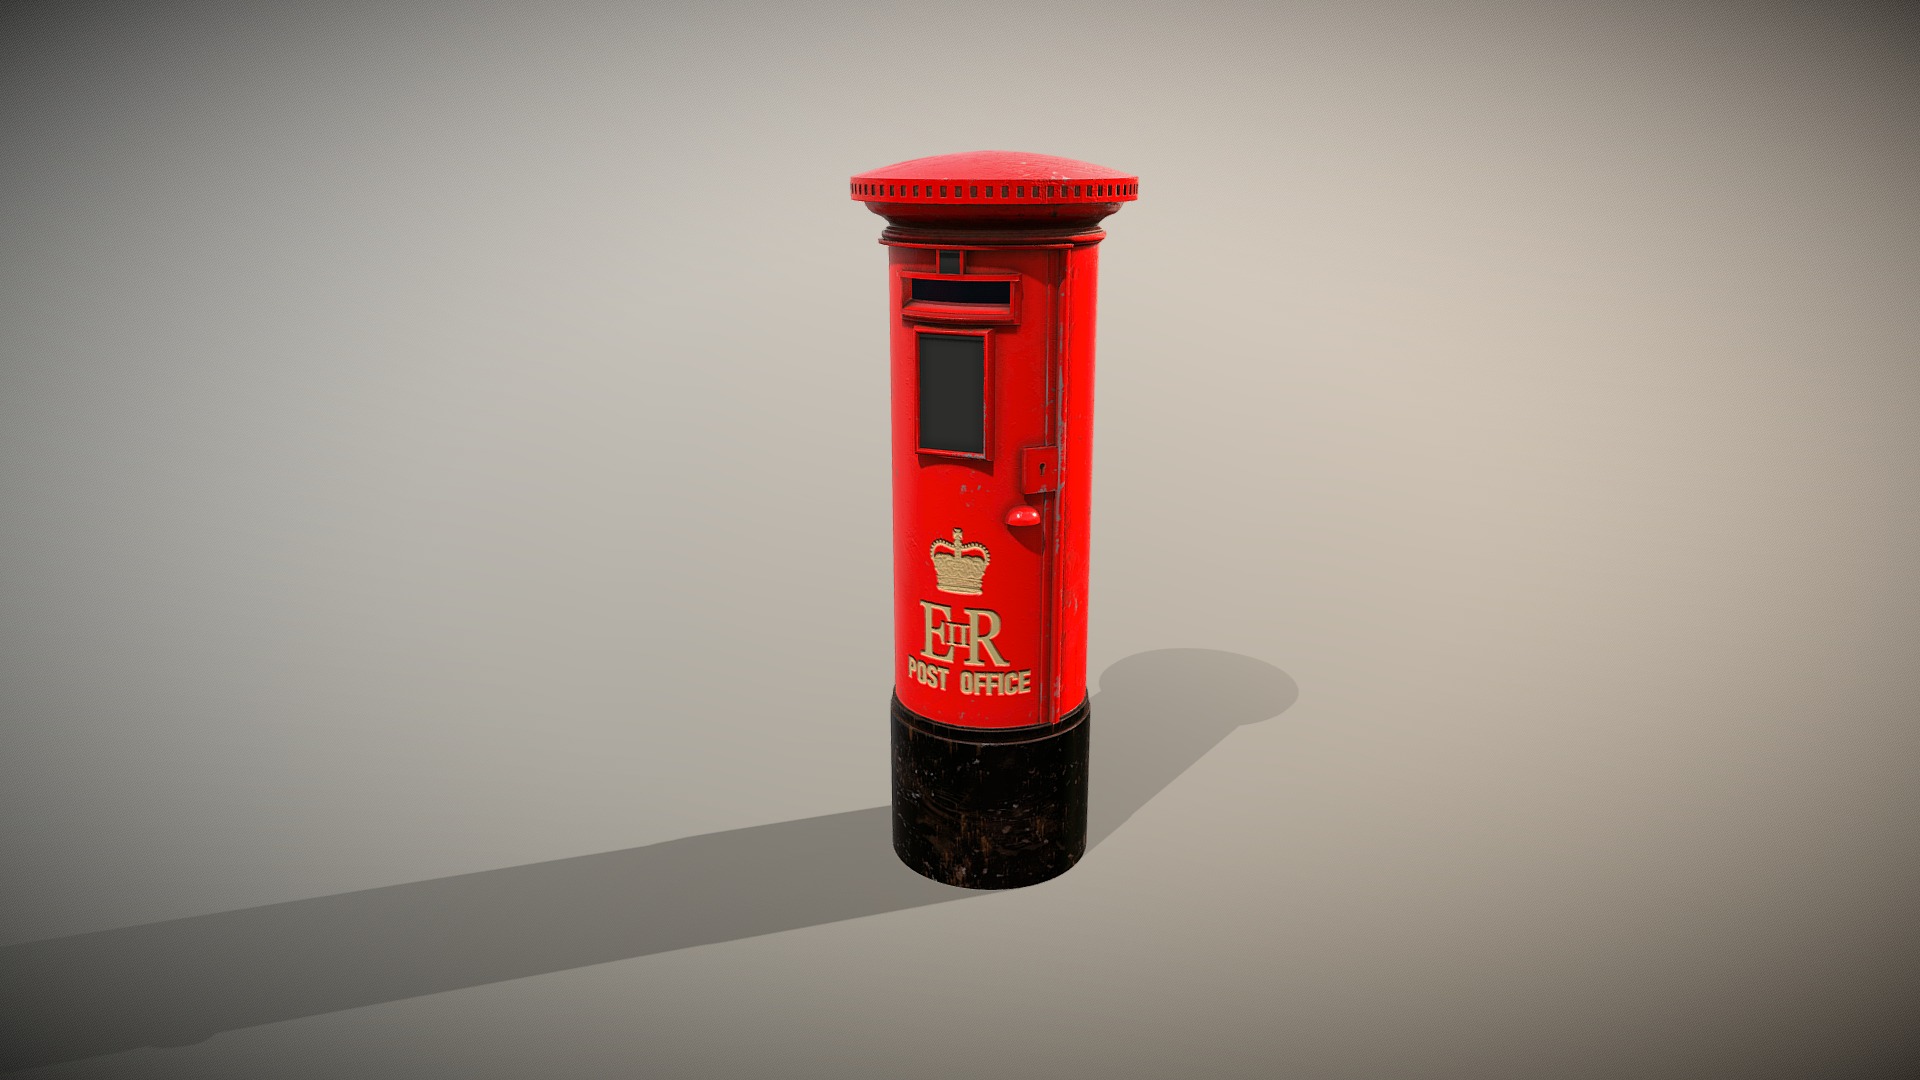 3D model Hong Kong Post Box - This is a 3D model of the Hong Kong Post Box. The 3D model is about a red and black fire extinguisher on a white surface.